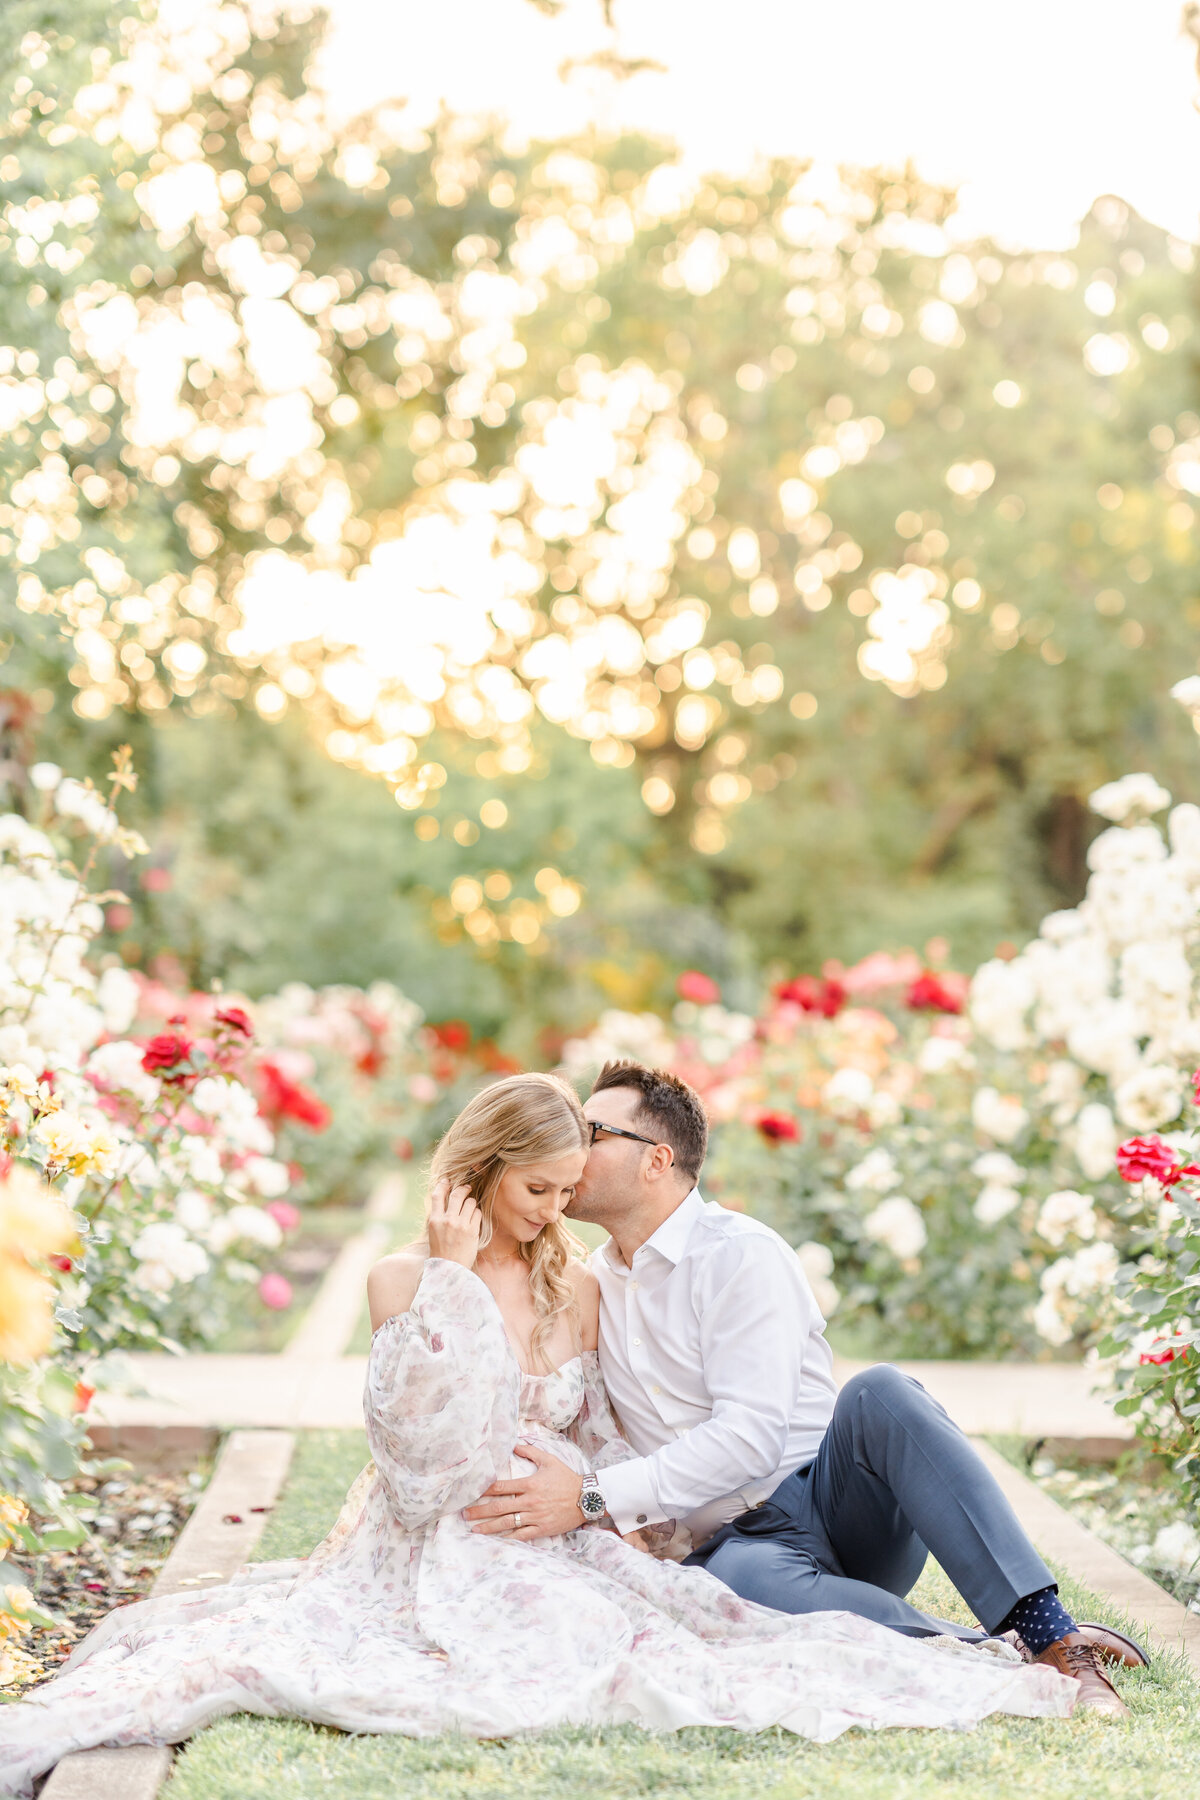 An expecting couple sits together in a rose garden while the man whispers gently into the woman's ear and holds her beautiful baby bump photographed by Bay area photographer, Light Livin Photography.